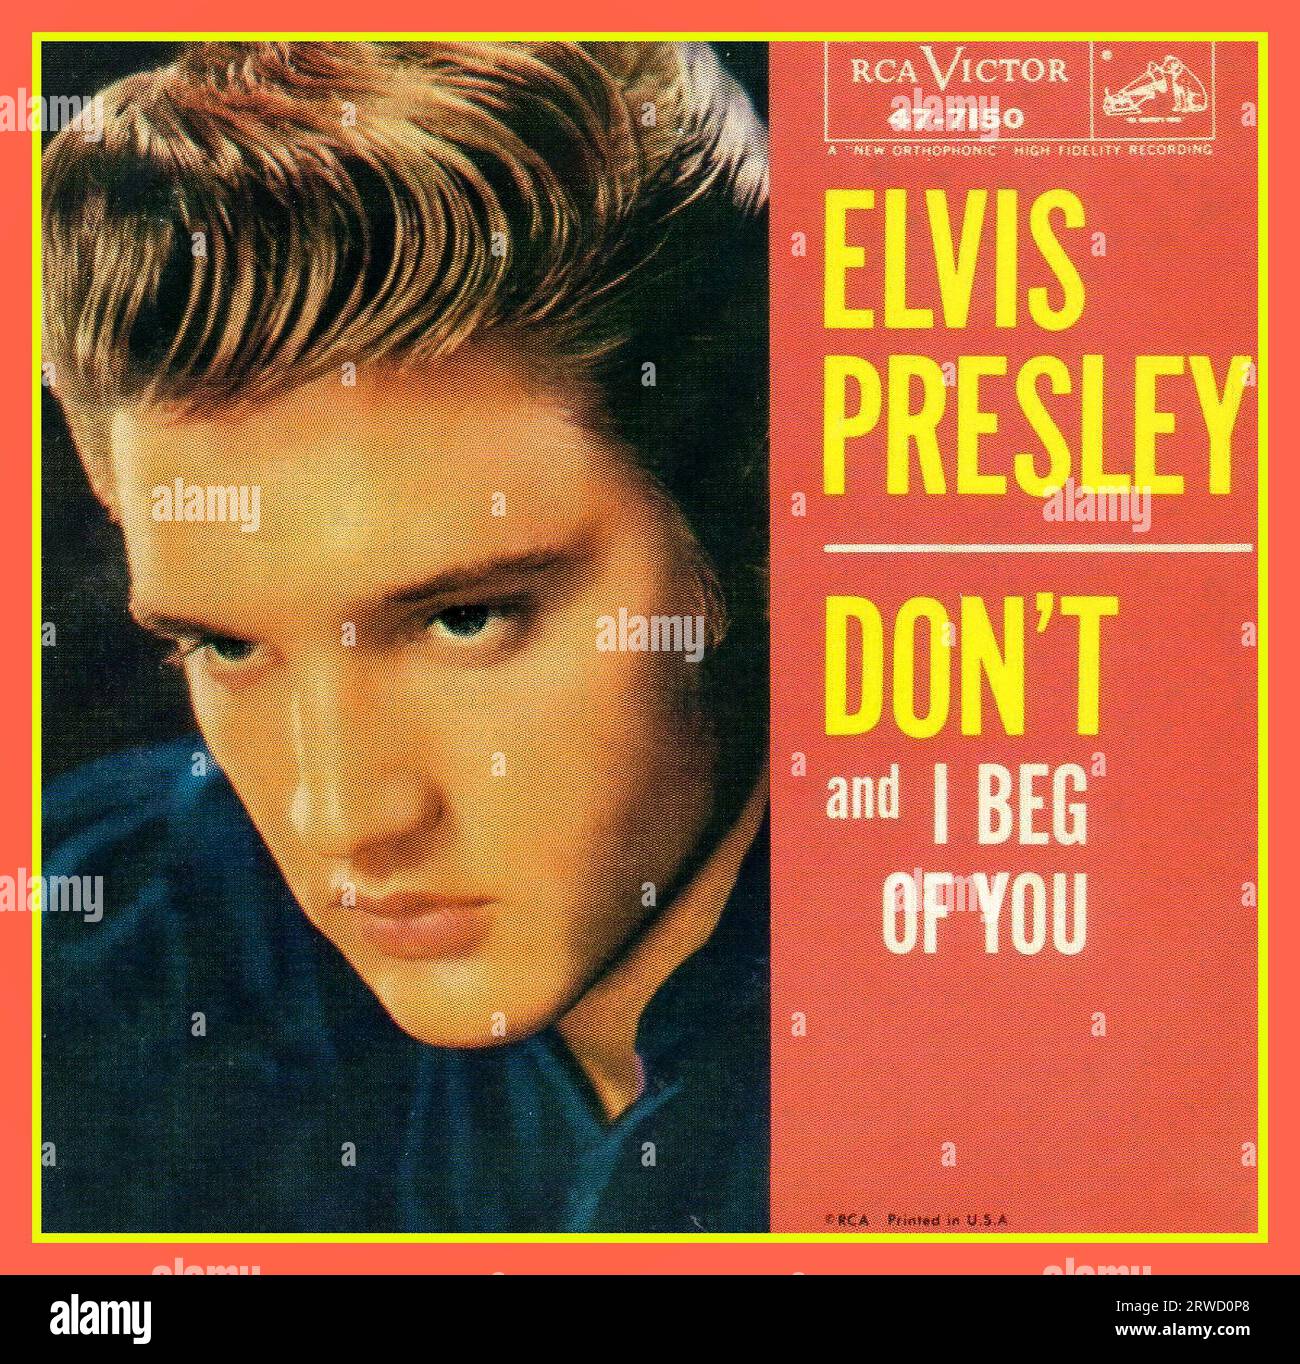 Vintage Elvis Presley Record Cover 'DONT' & I Beg of You' RCA Victor High Fidelity Recording'Don't' is a song recorded by Elvis Presley and released in 1958. Written and produced by Jerry Leiber and Mike Stoller,it was Presley's eleventh number-one hit in the United States. 'Don't' also peaked at number four on the R&B charts. Billboard ranked the ballad as the No. 3 song for 1958. Stock Photo